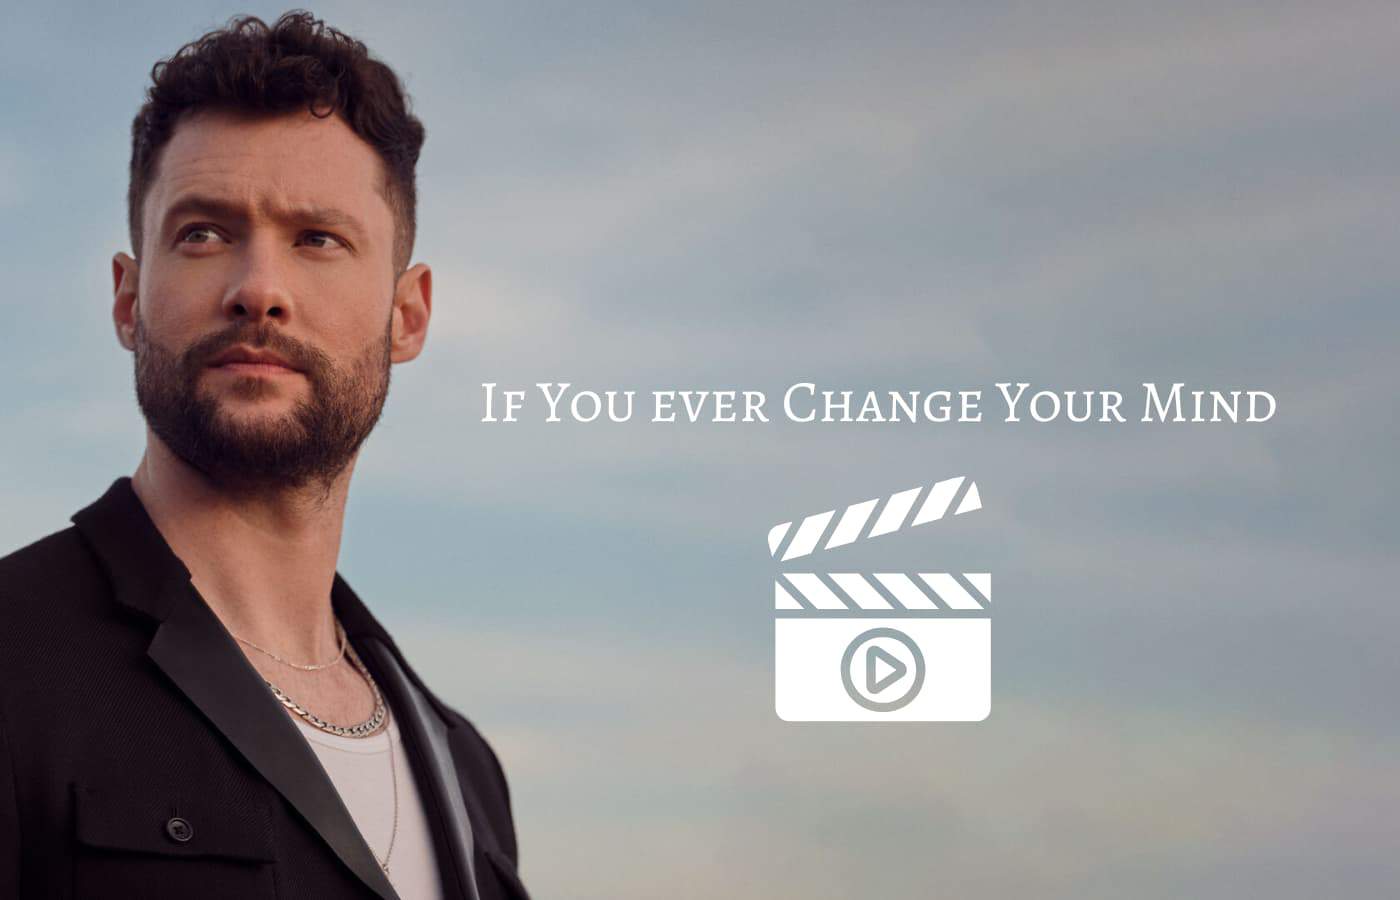 Calum Scott - Music Video 'If You ever Change Your Mind' - Shot on Location at Carousel - The Location Guys